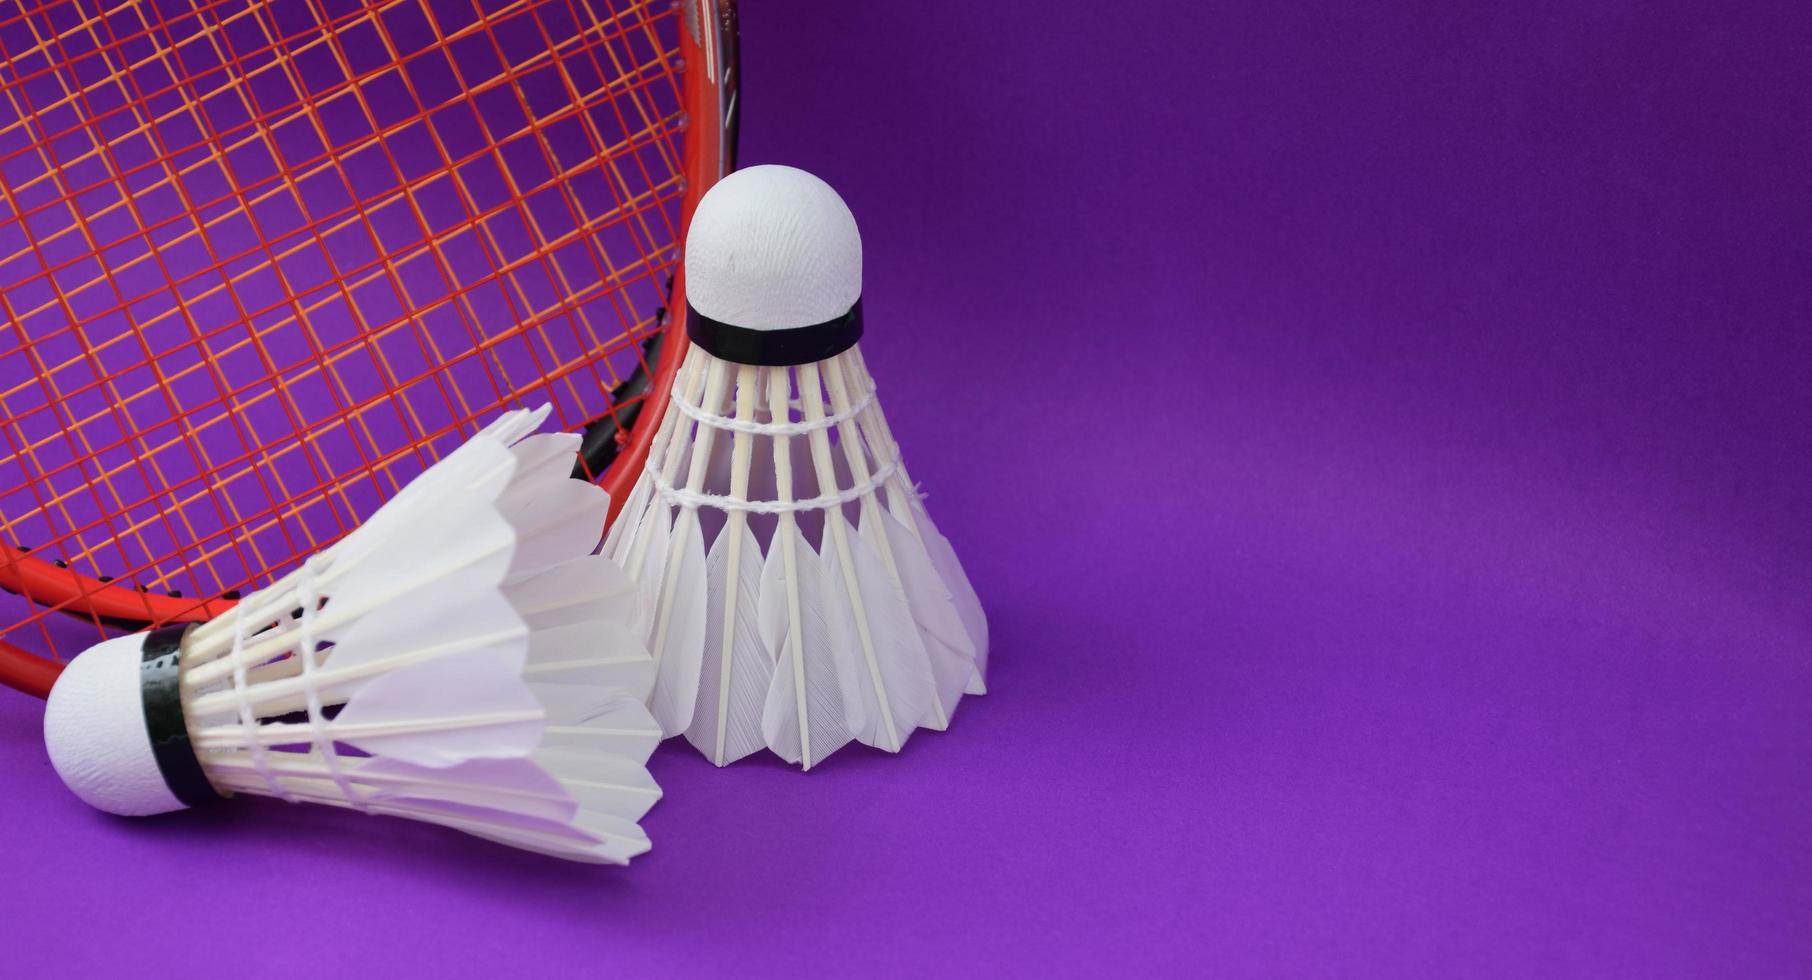 White cream badminton shuttlecock  in front of badminton rackets on purple floor of indoor badminton court, soft and selective focus on shuttlecock, concept for badminton sport lovers around the world photo